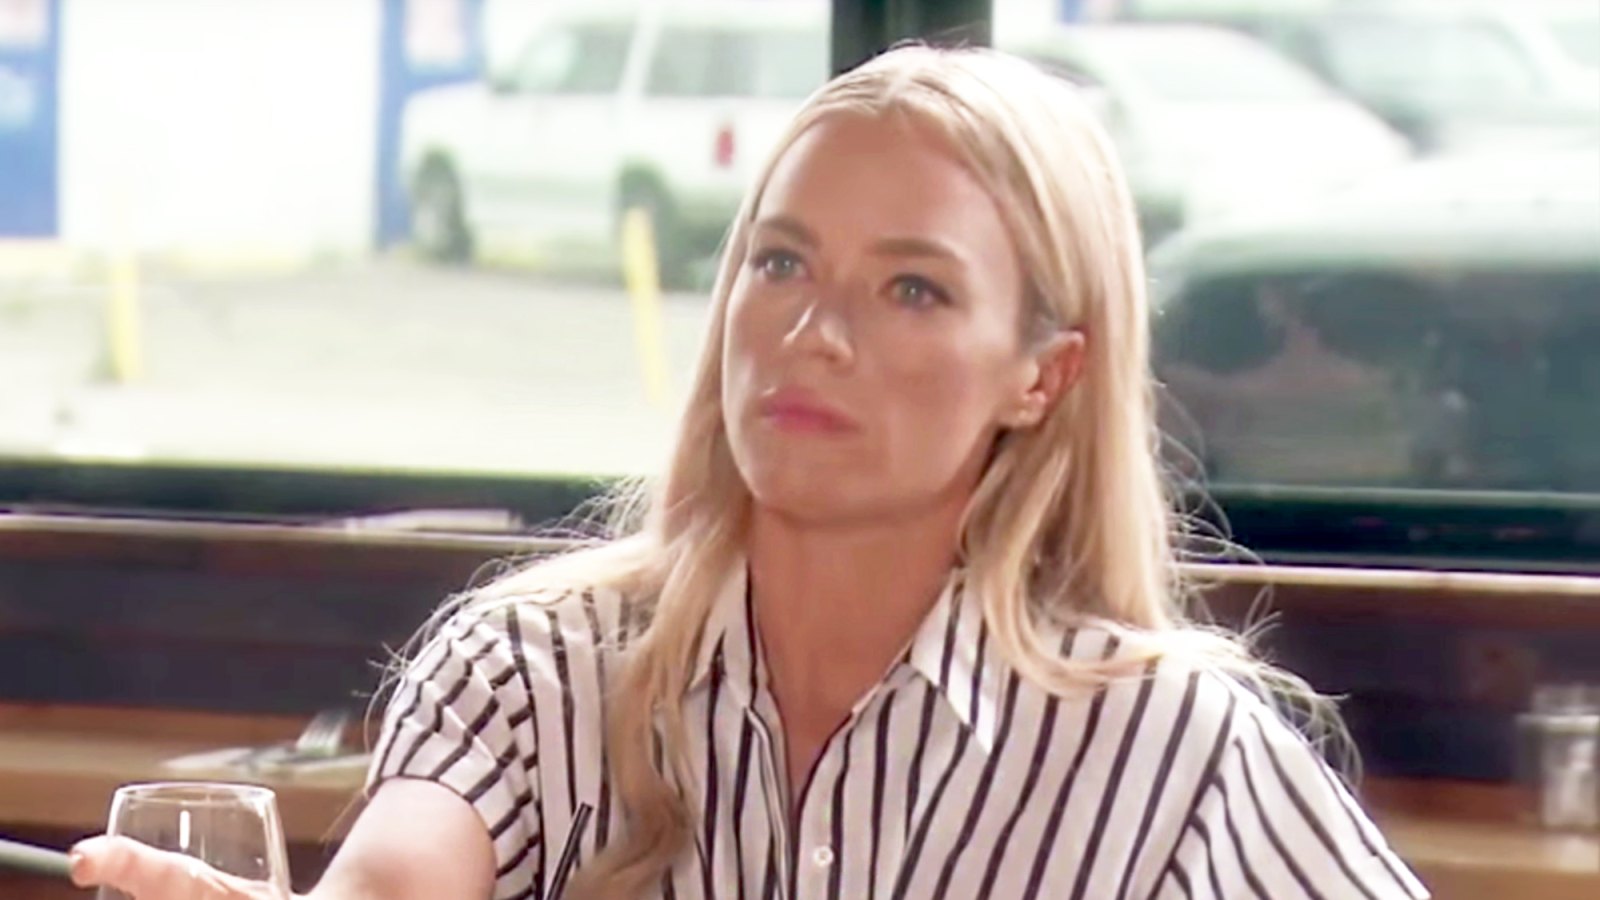 ‘Real Housewives of Beverly Hills’ star Teddi Mellencamp Arroyave